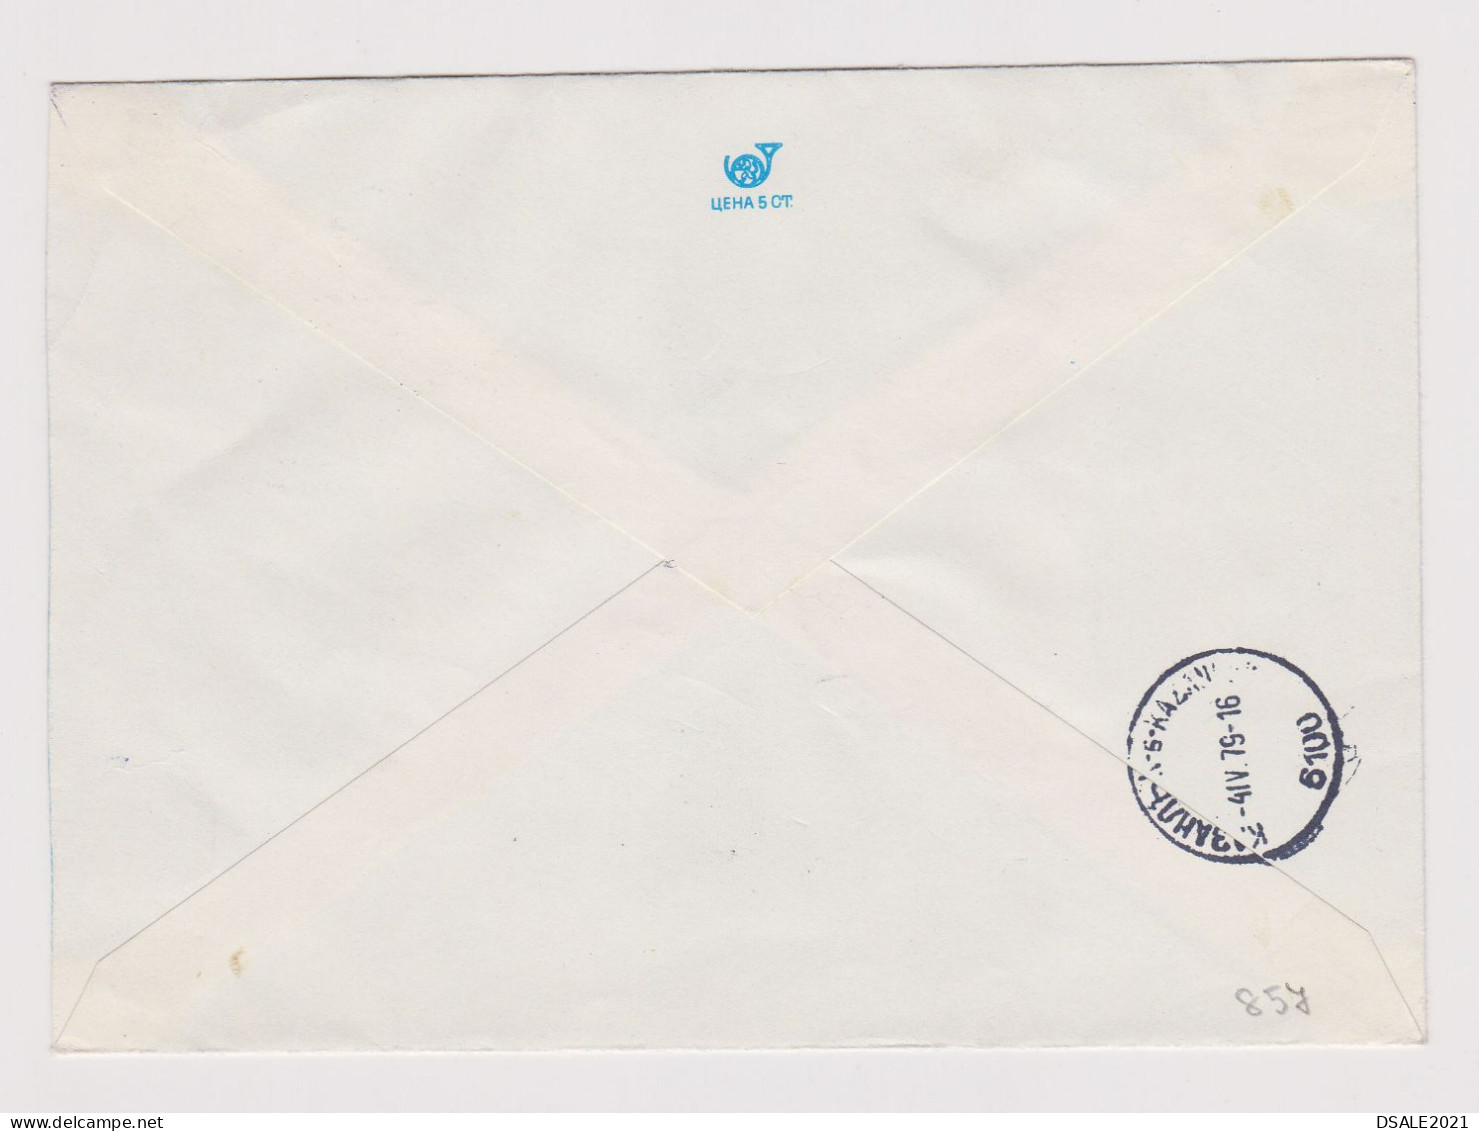 Bulgaria Bulgarien 1979 Ganzsachen R-Brief, Postal Stationery Cover, Registered W/Topic Stamps Flower, Architecture /857 - Omslagen